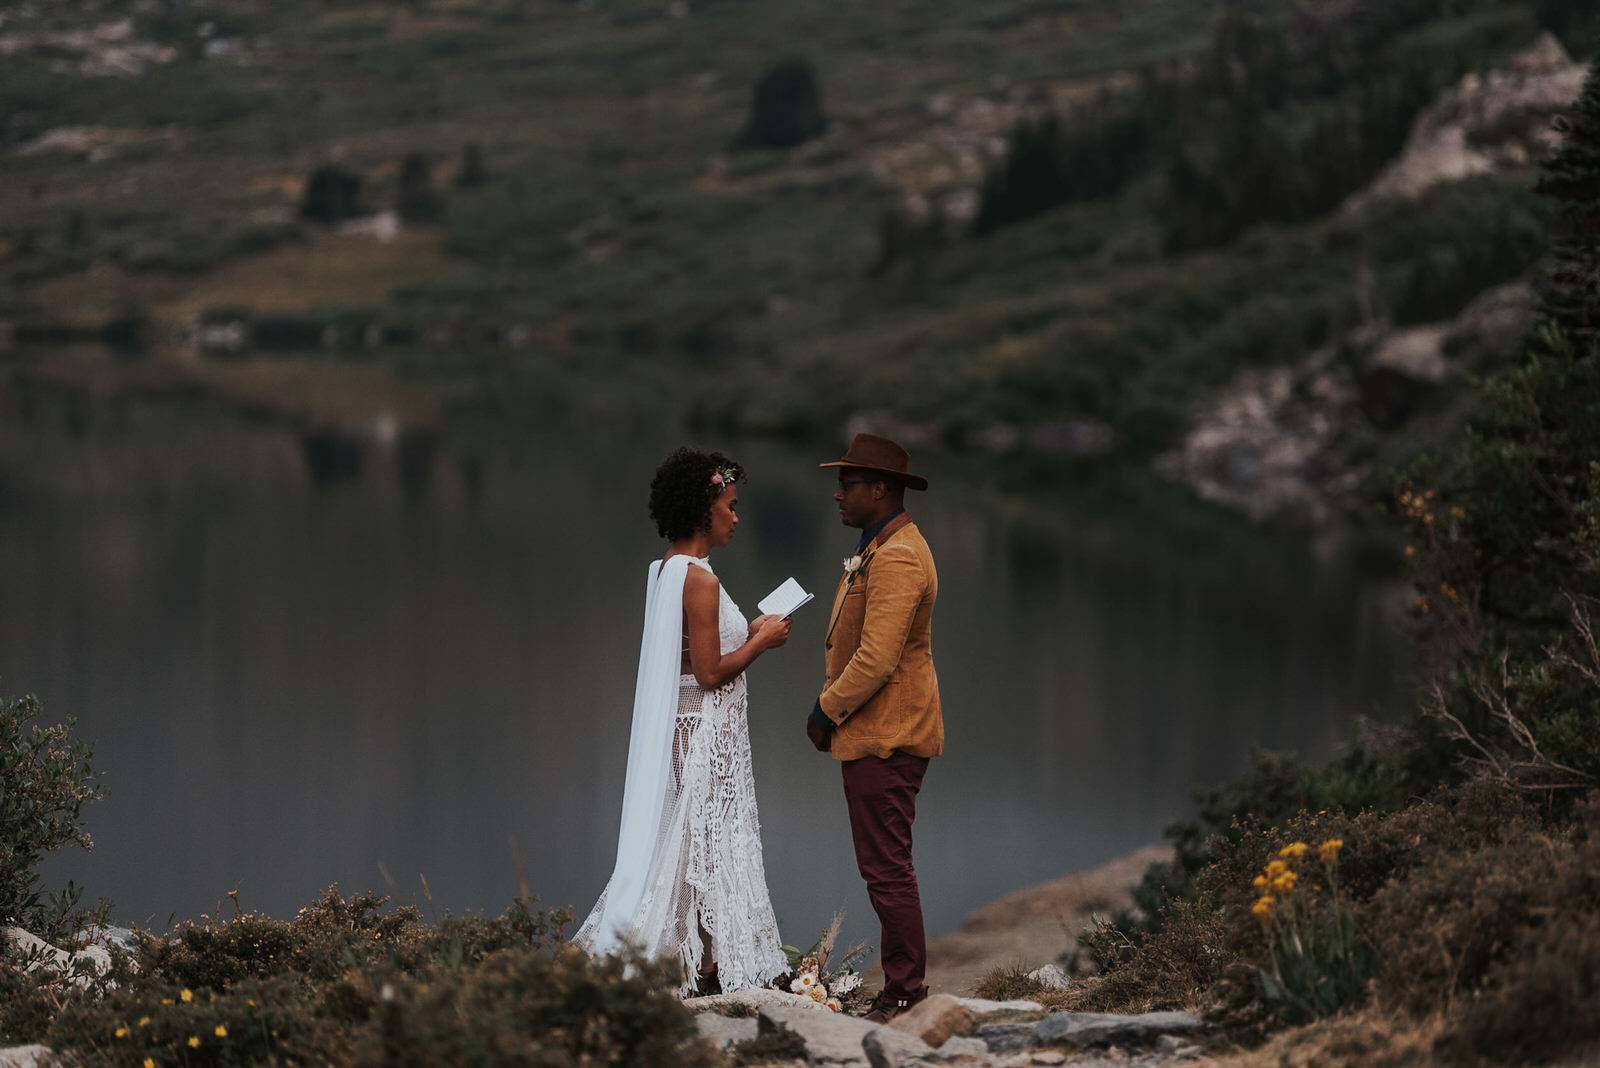 Want to Get Married Without the Hassle? Here’s a Guide on How to Elope